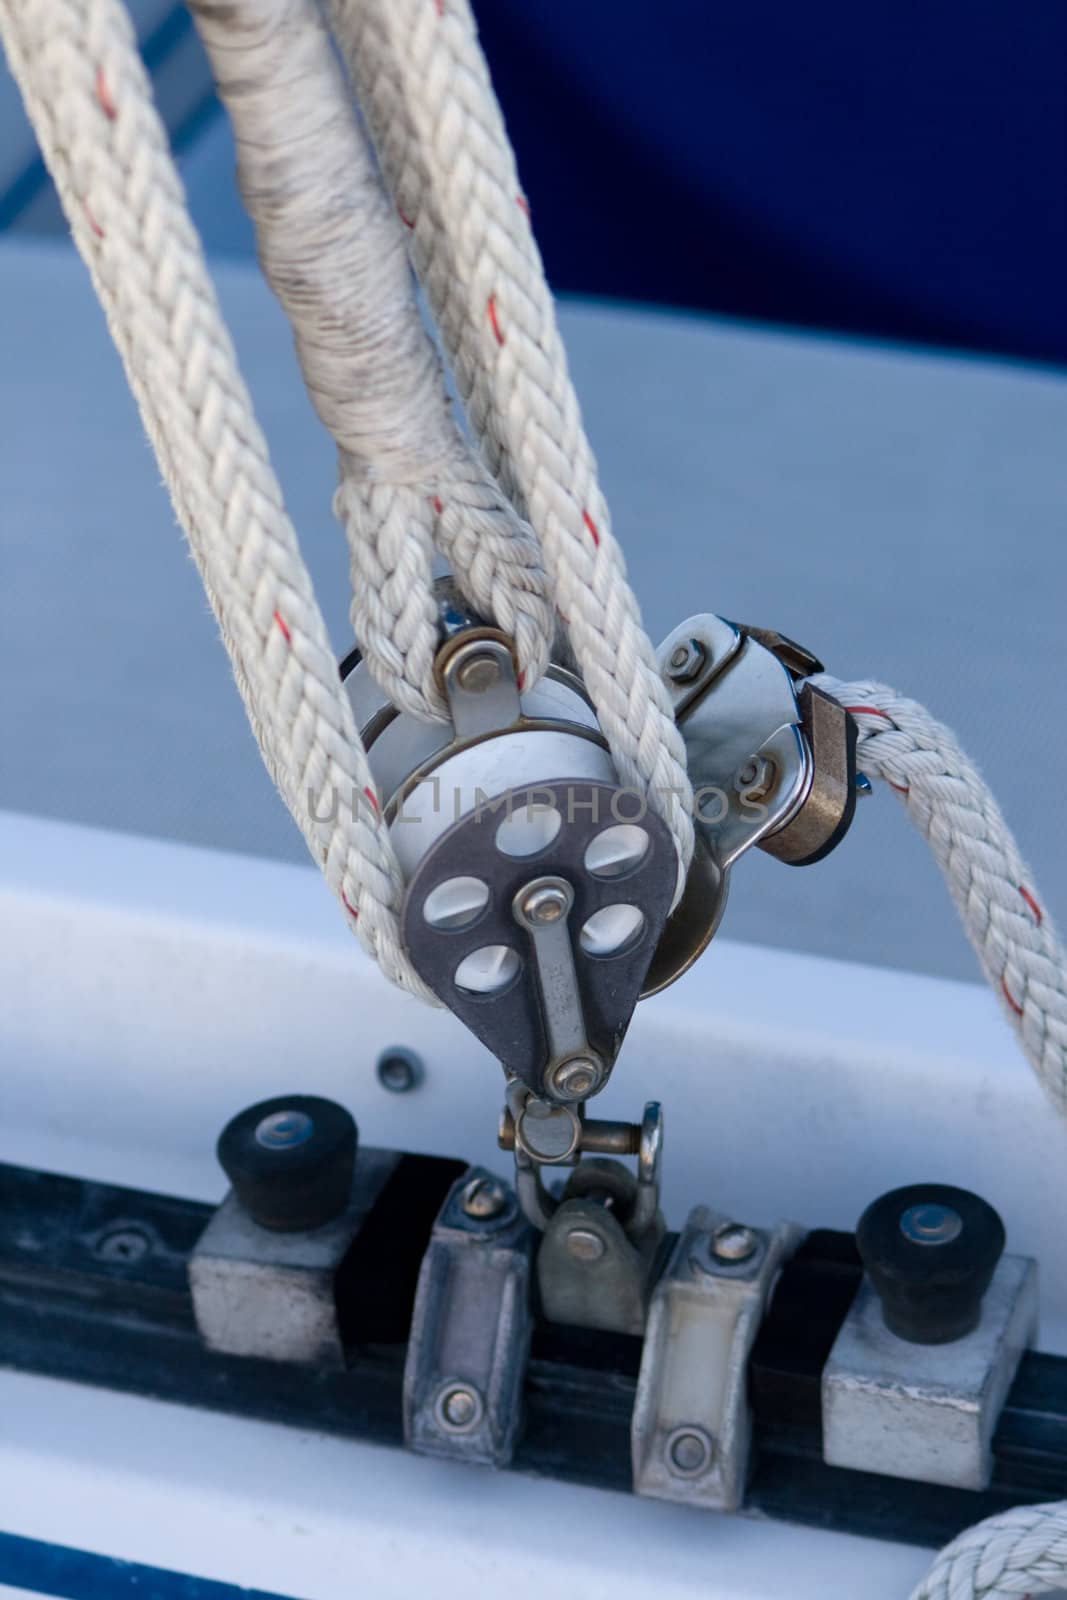 Sailboat Rigging Pulley and Tackle is typical sight on a sailboat or yacht in any marina around the world.
